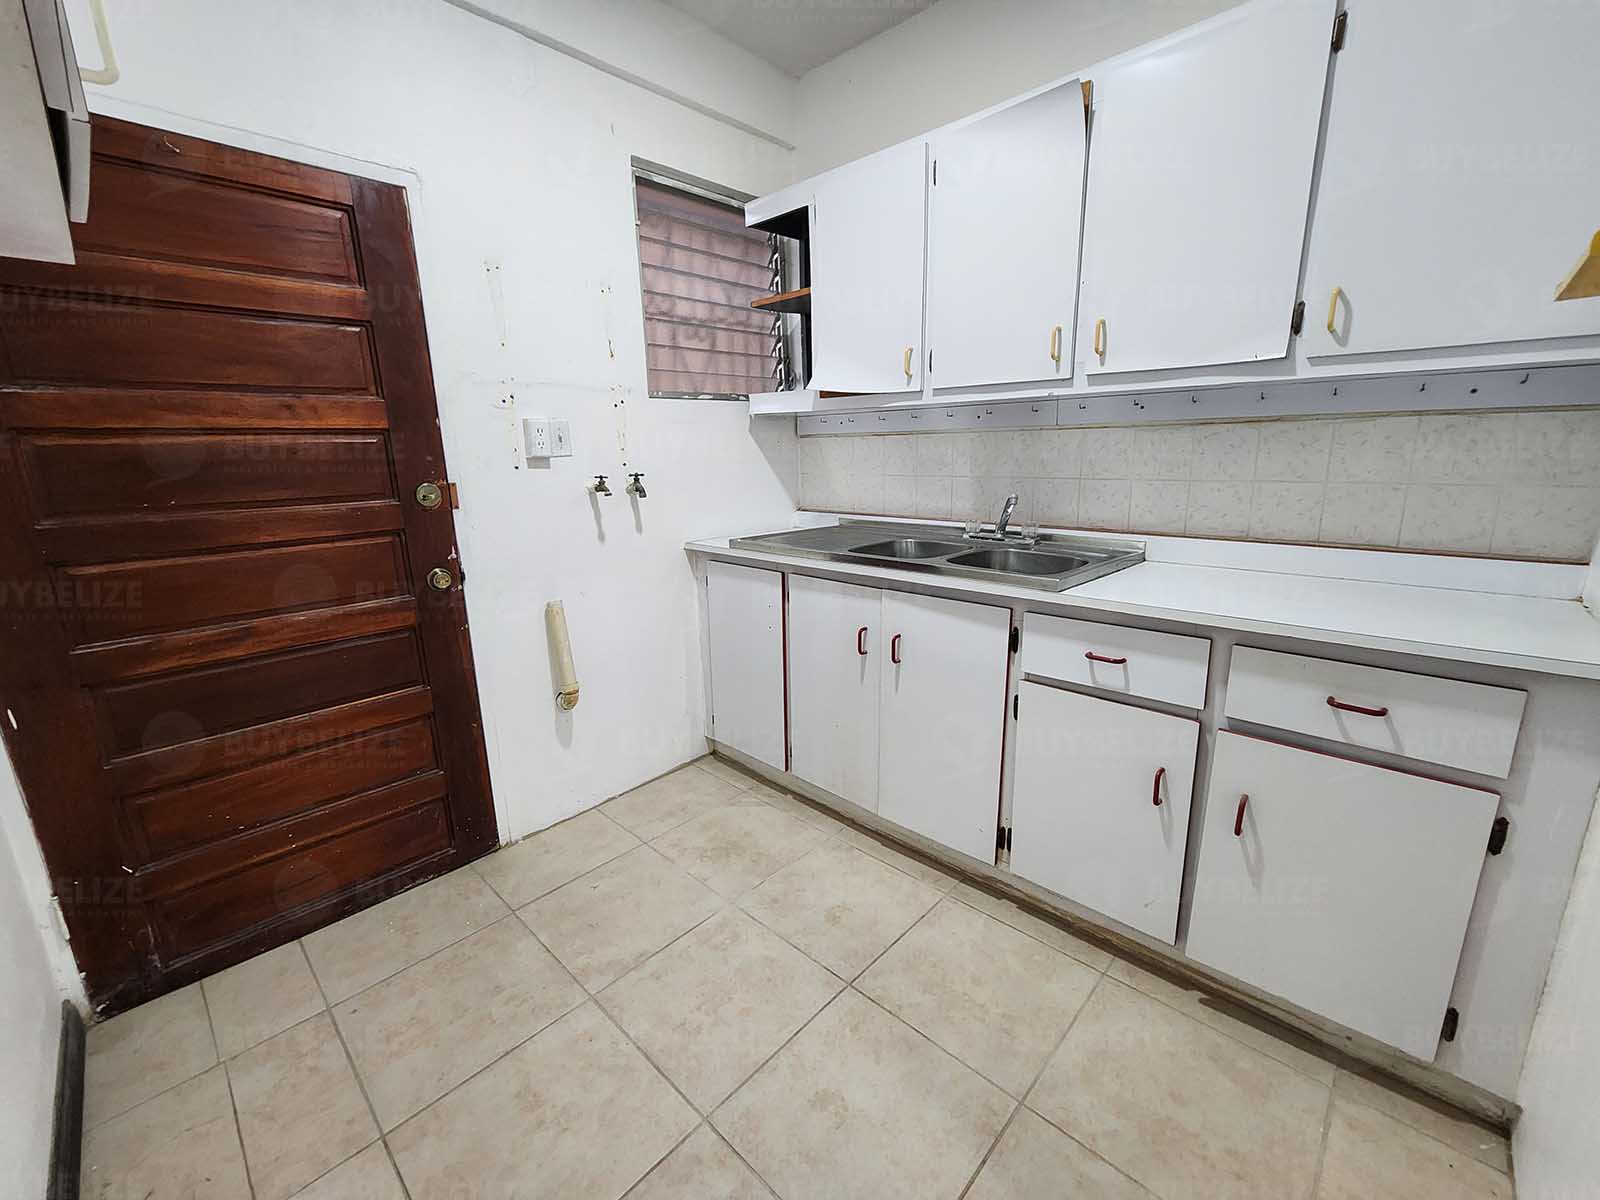 3 bedroom 1 bath house for rent located in Belize City